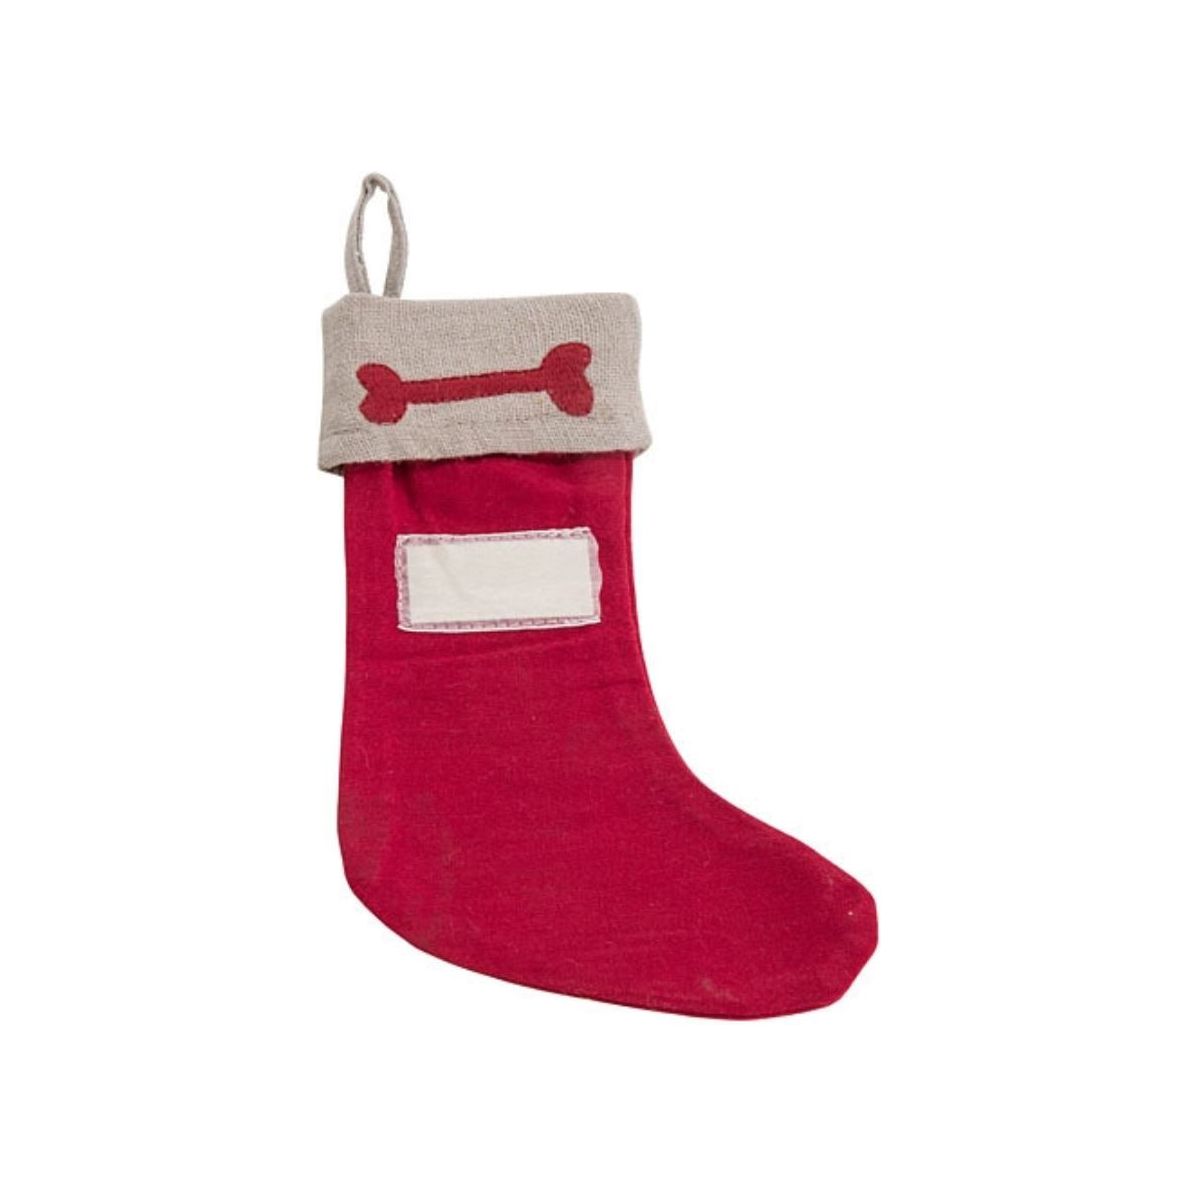 Red sock with bone pattern for dogs